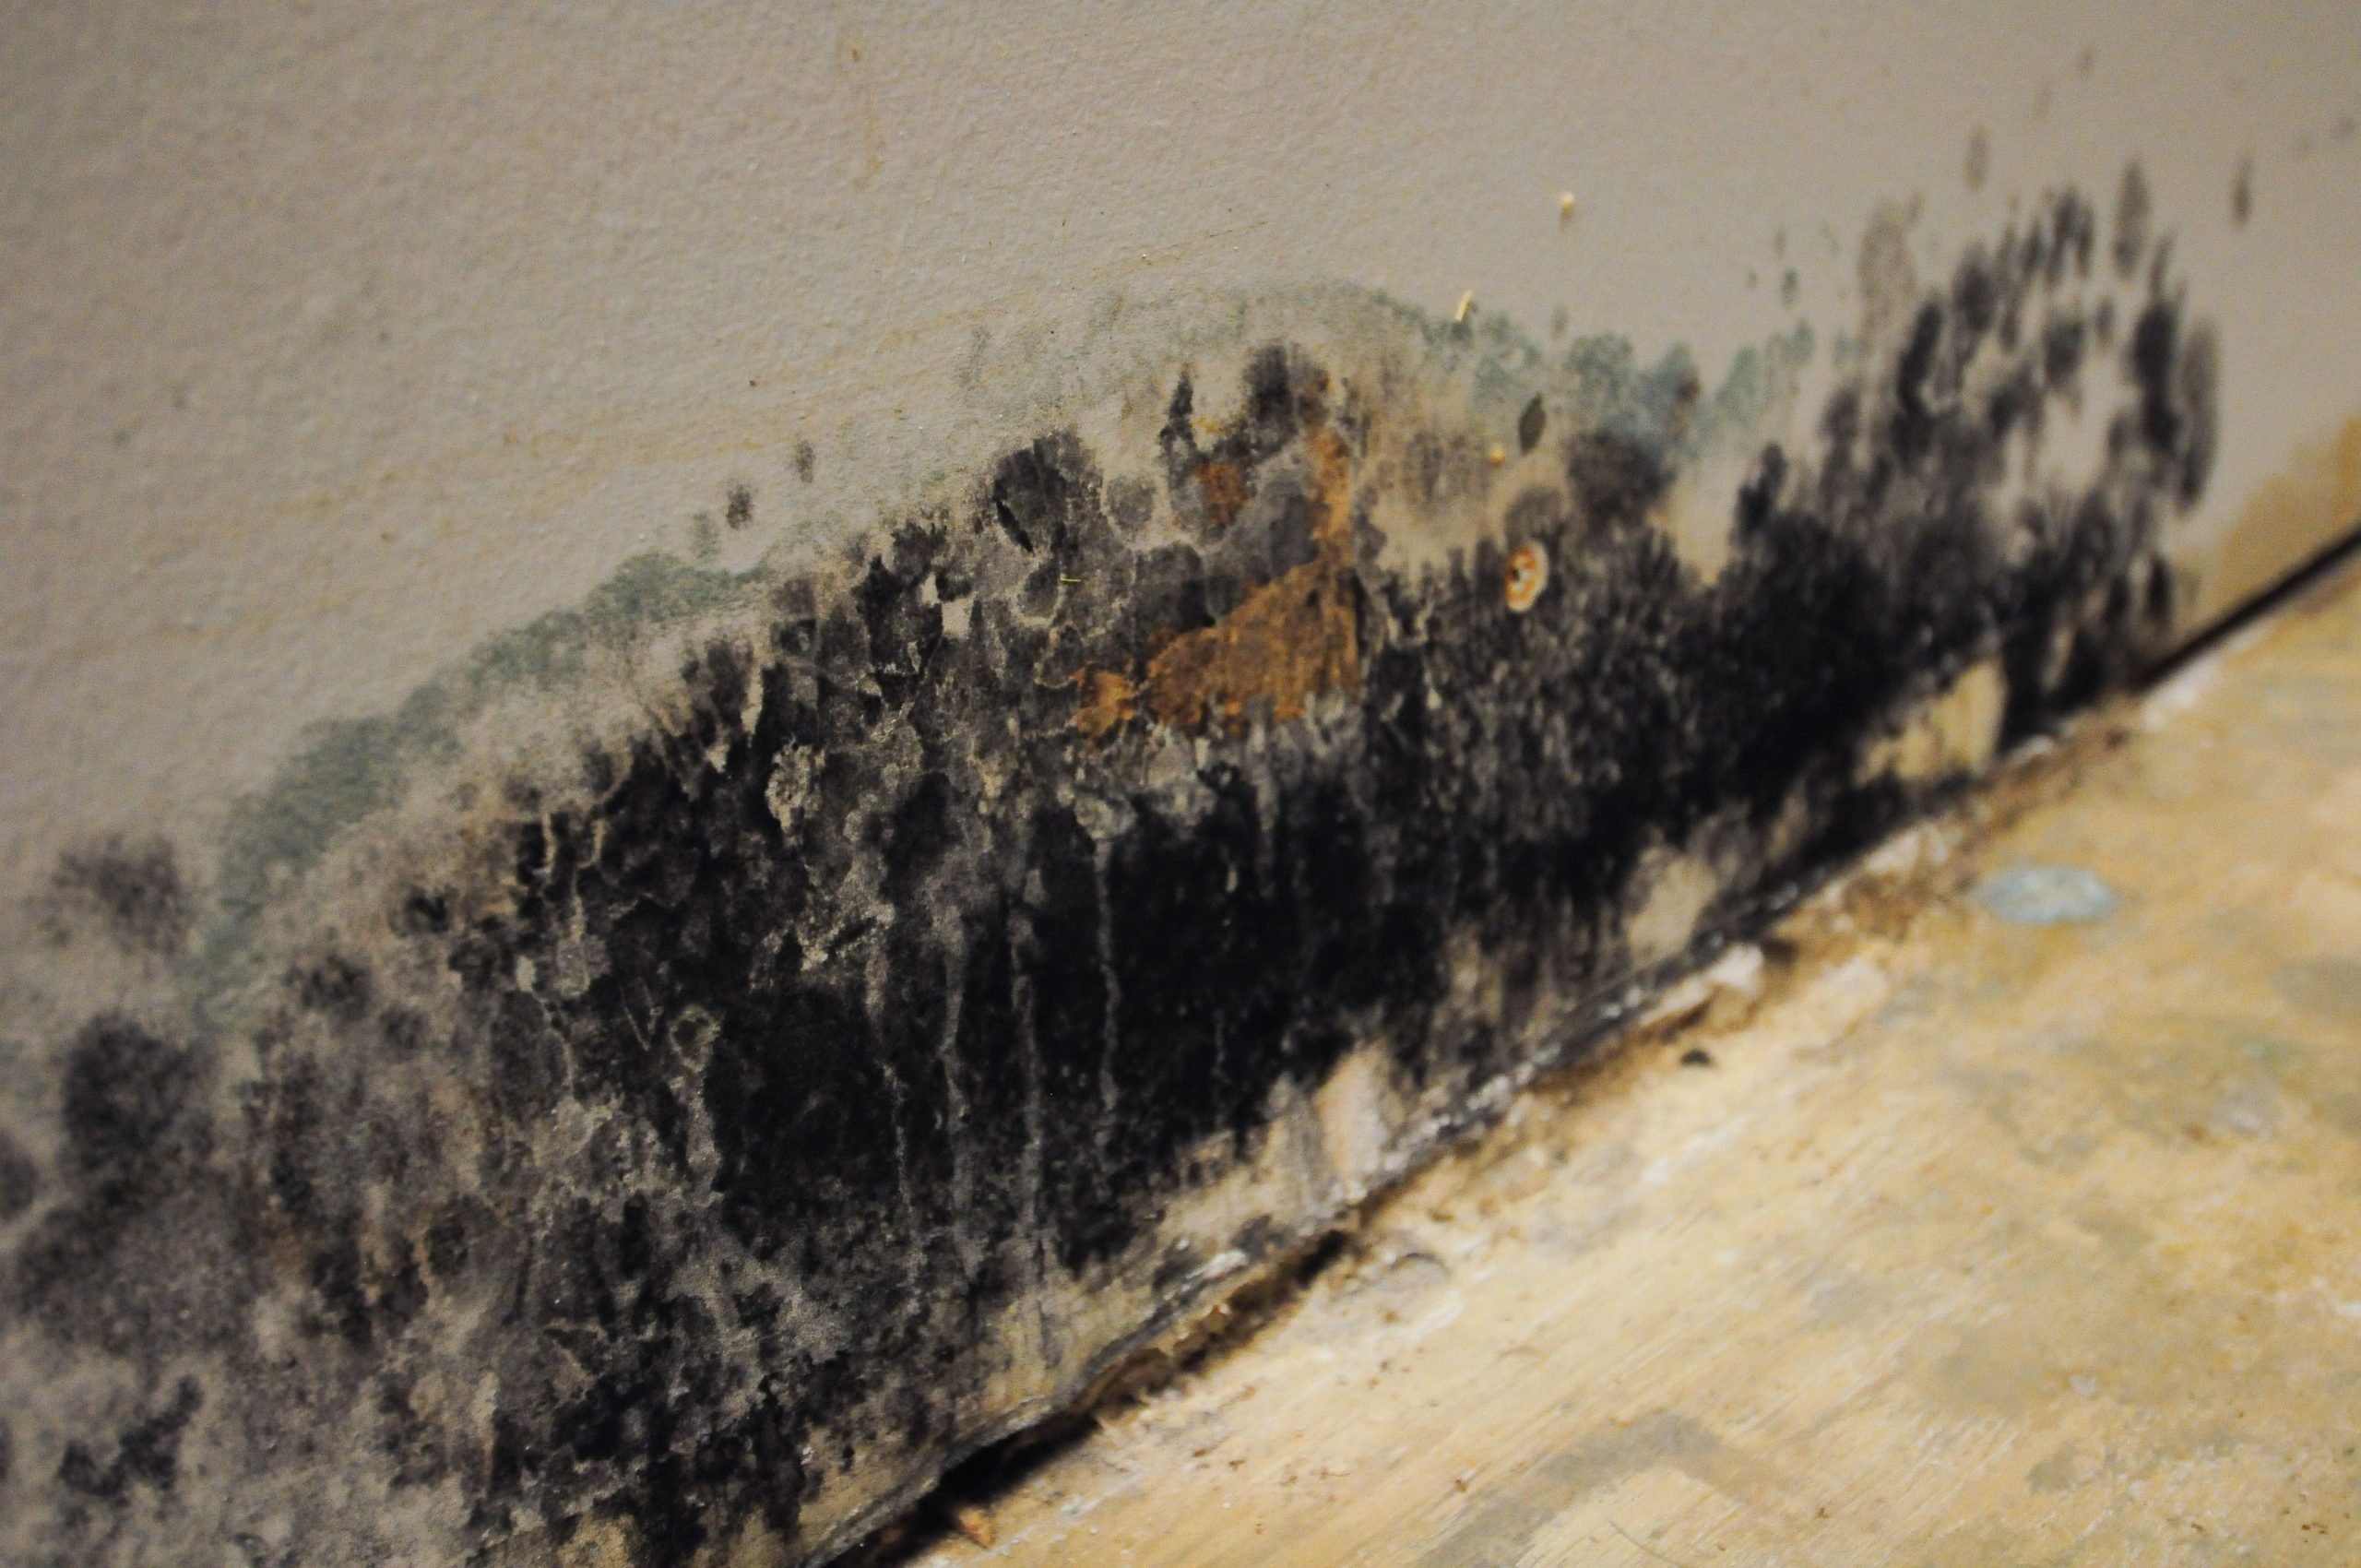 Health Risks of Black Mold (Stachybotrys chartarum)